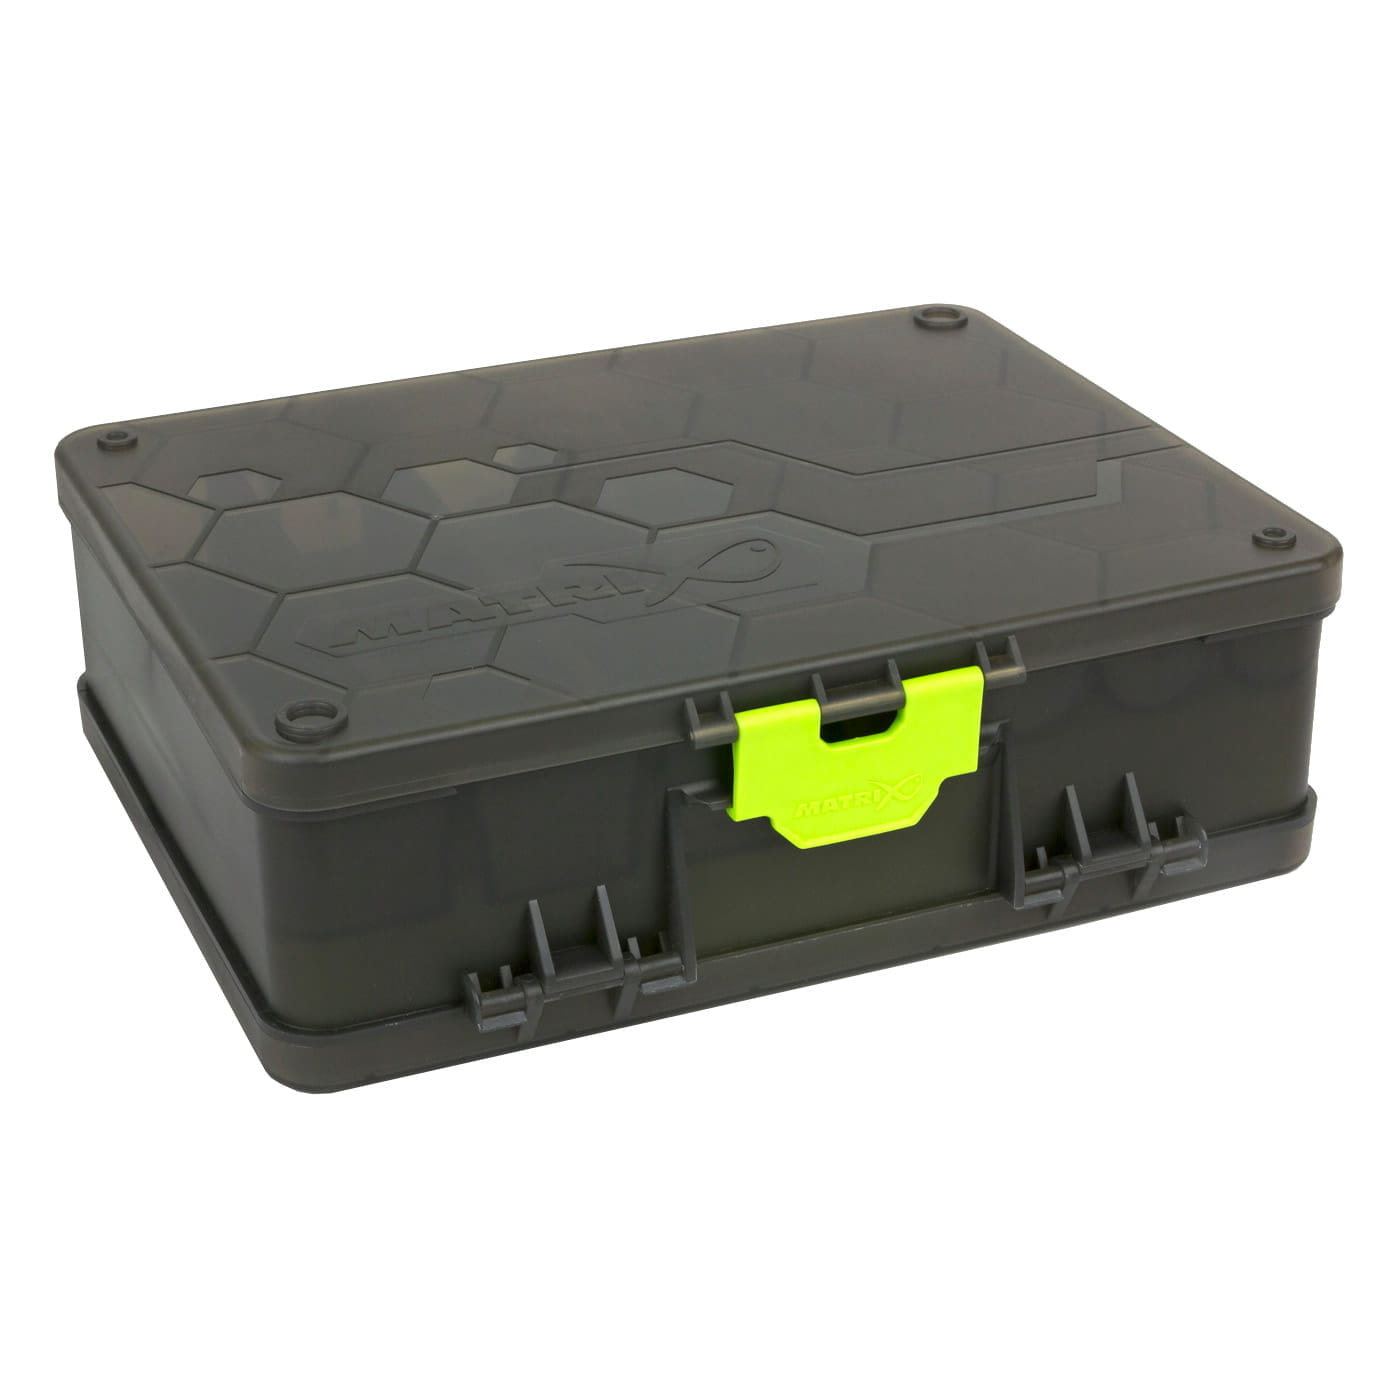 Double Sided Feeder Tackle Box Main